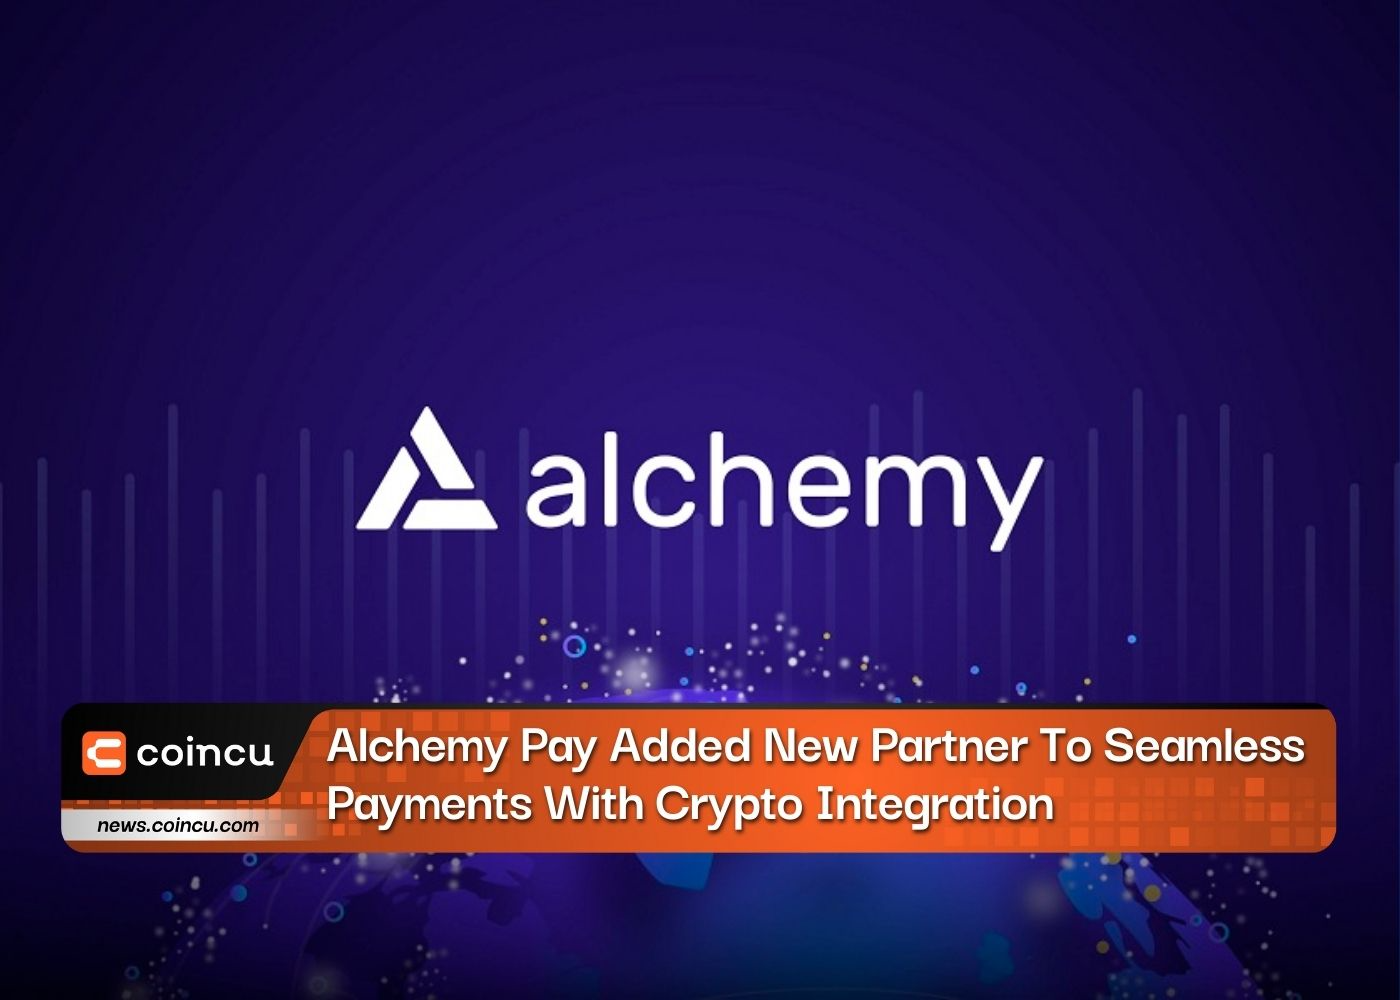 Alchemy Pay Added New Partner To Seamless Payments With Crypto Integration